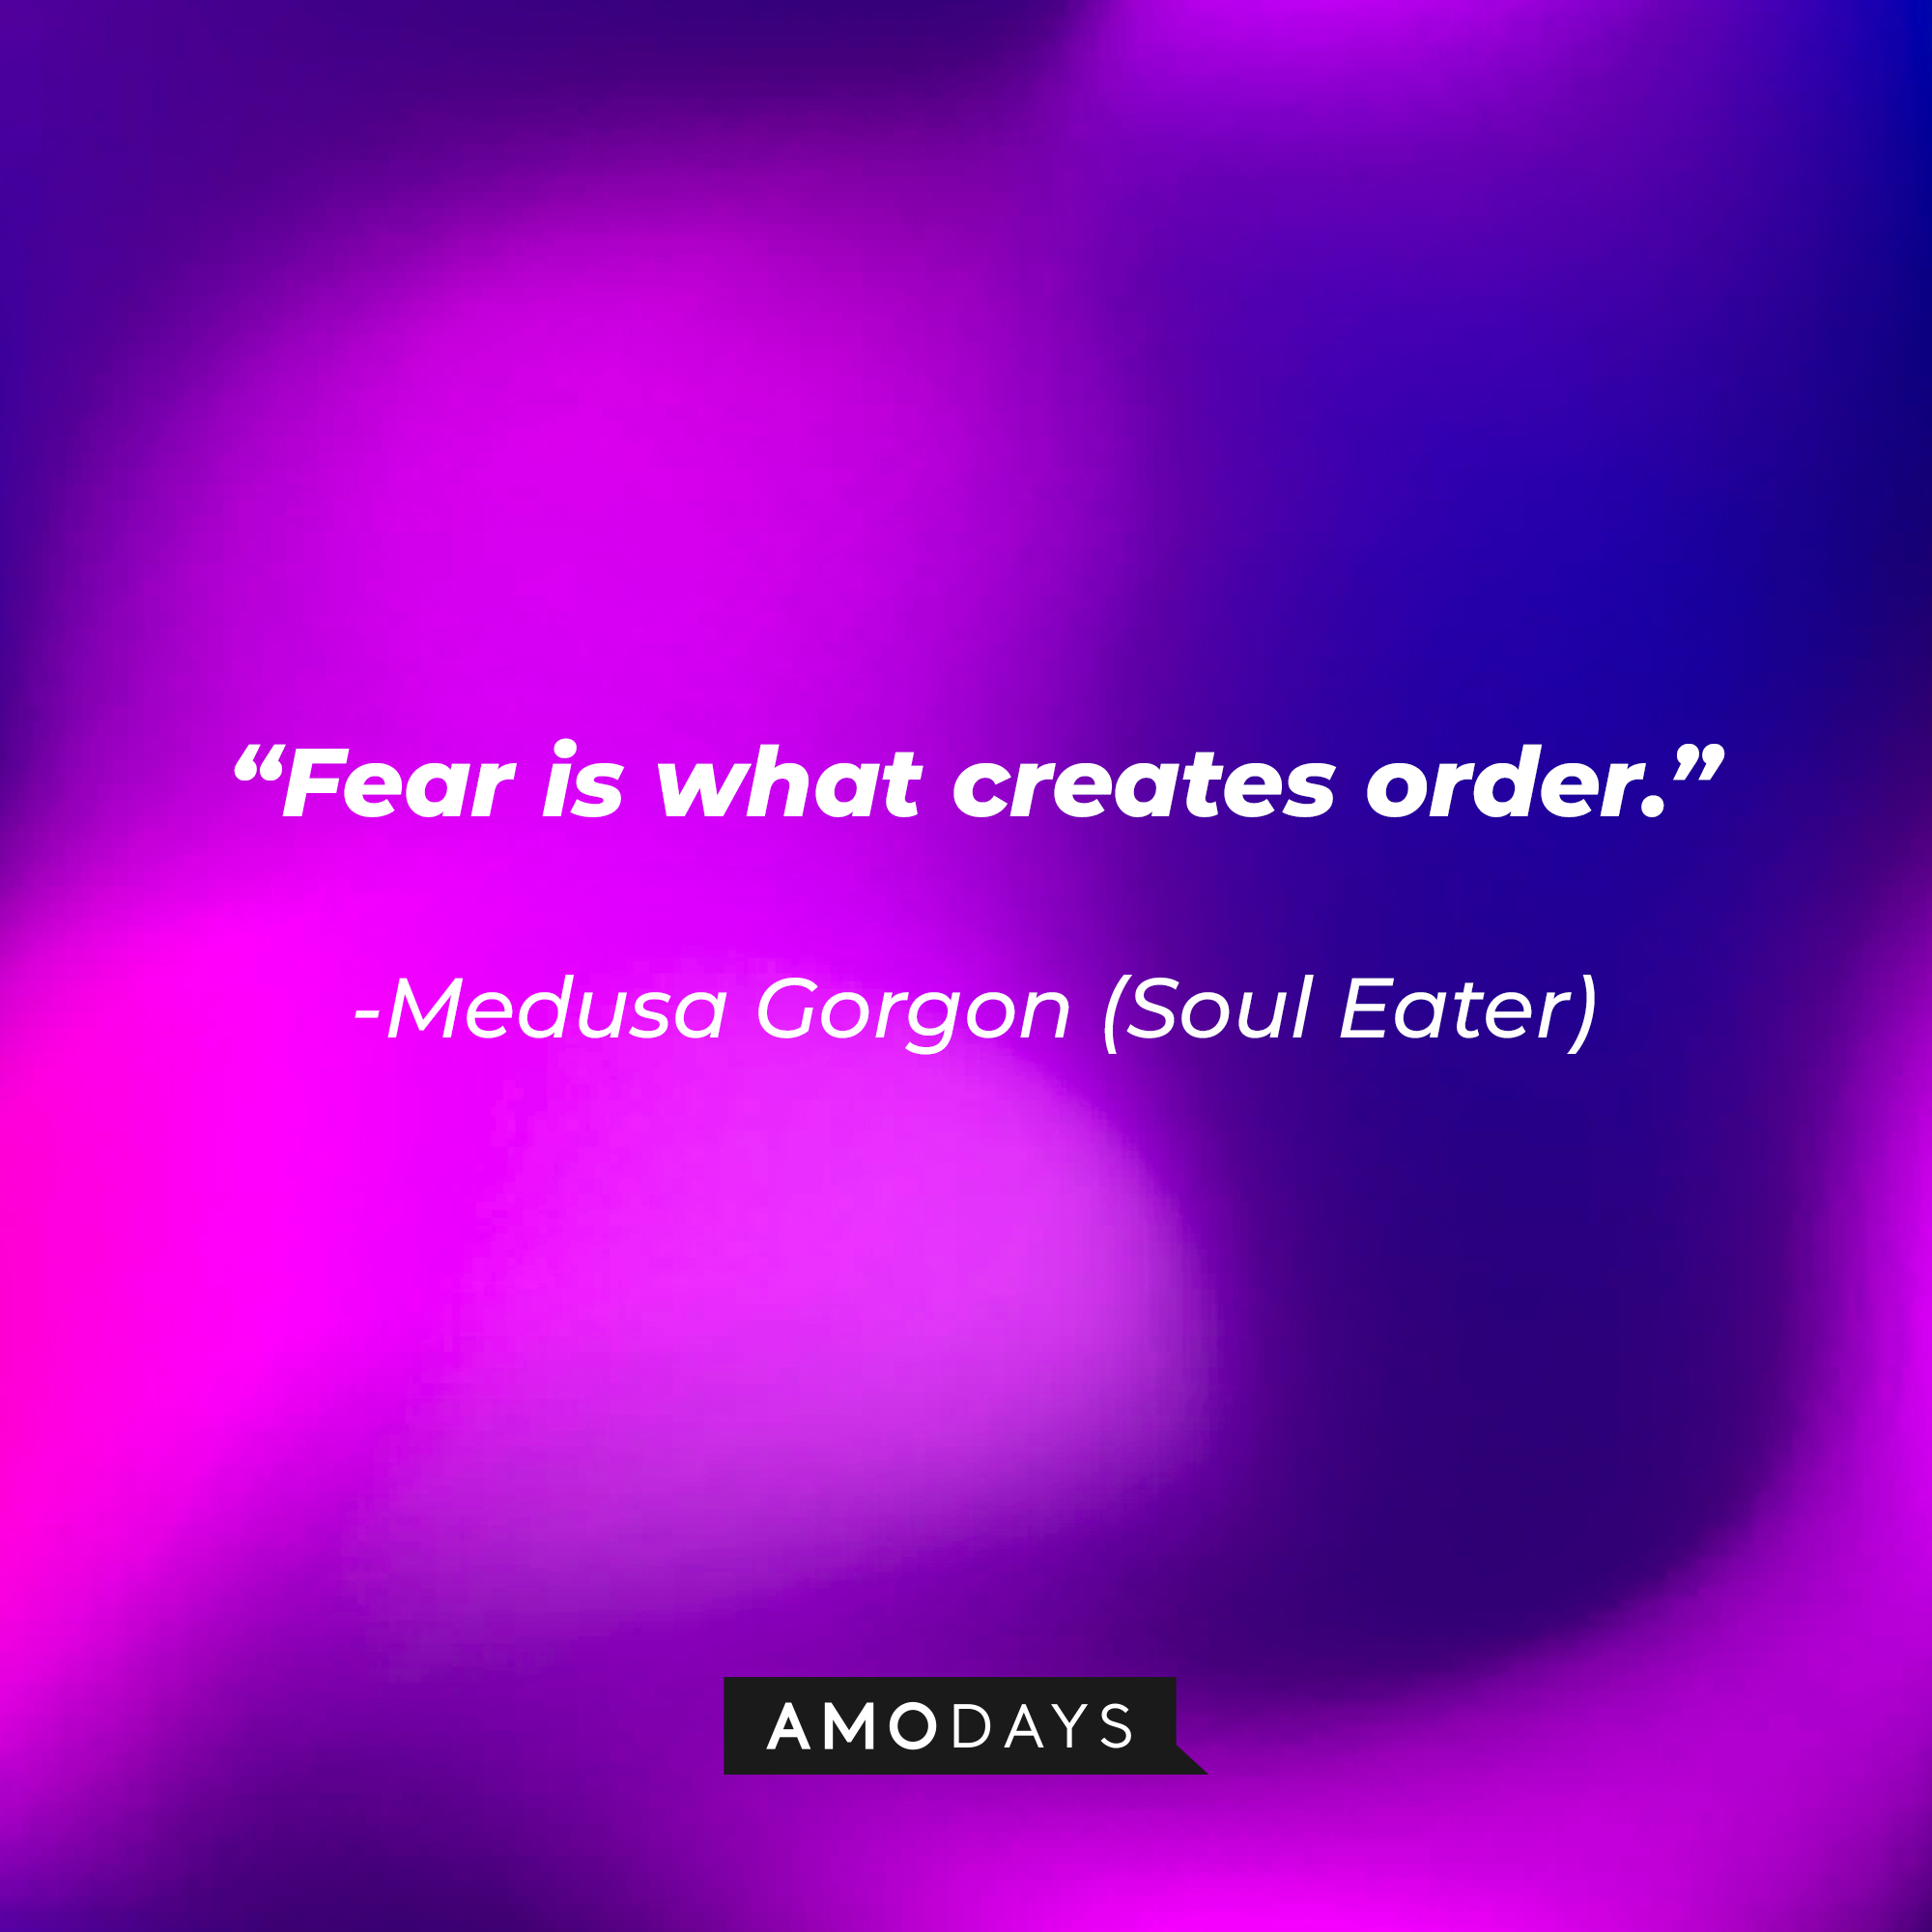 Medusa Gorgon's quote: "Fear is what creates order." | Source: Amodays